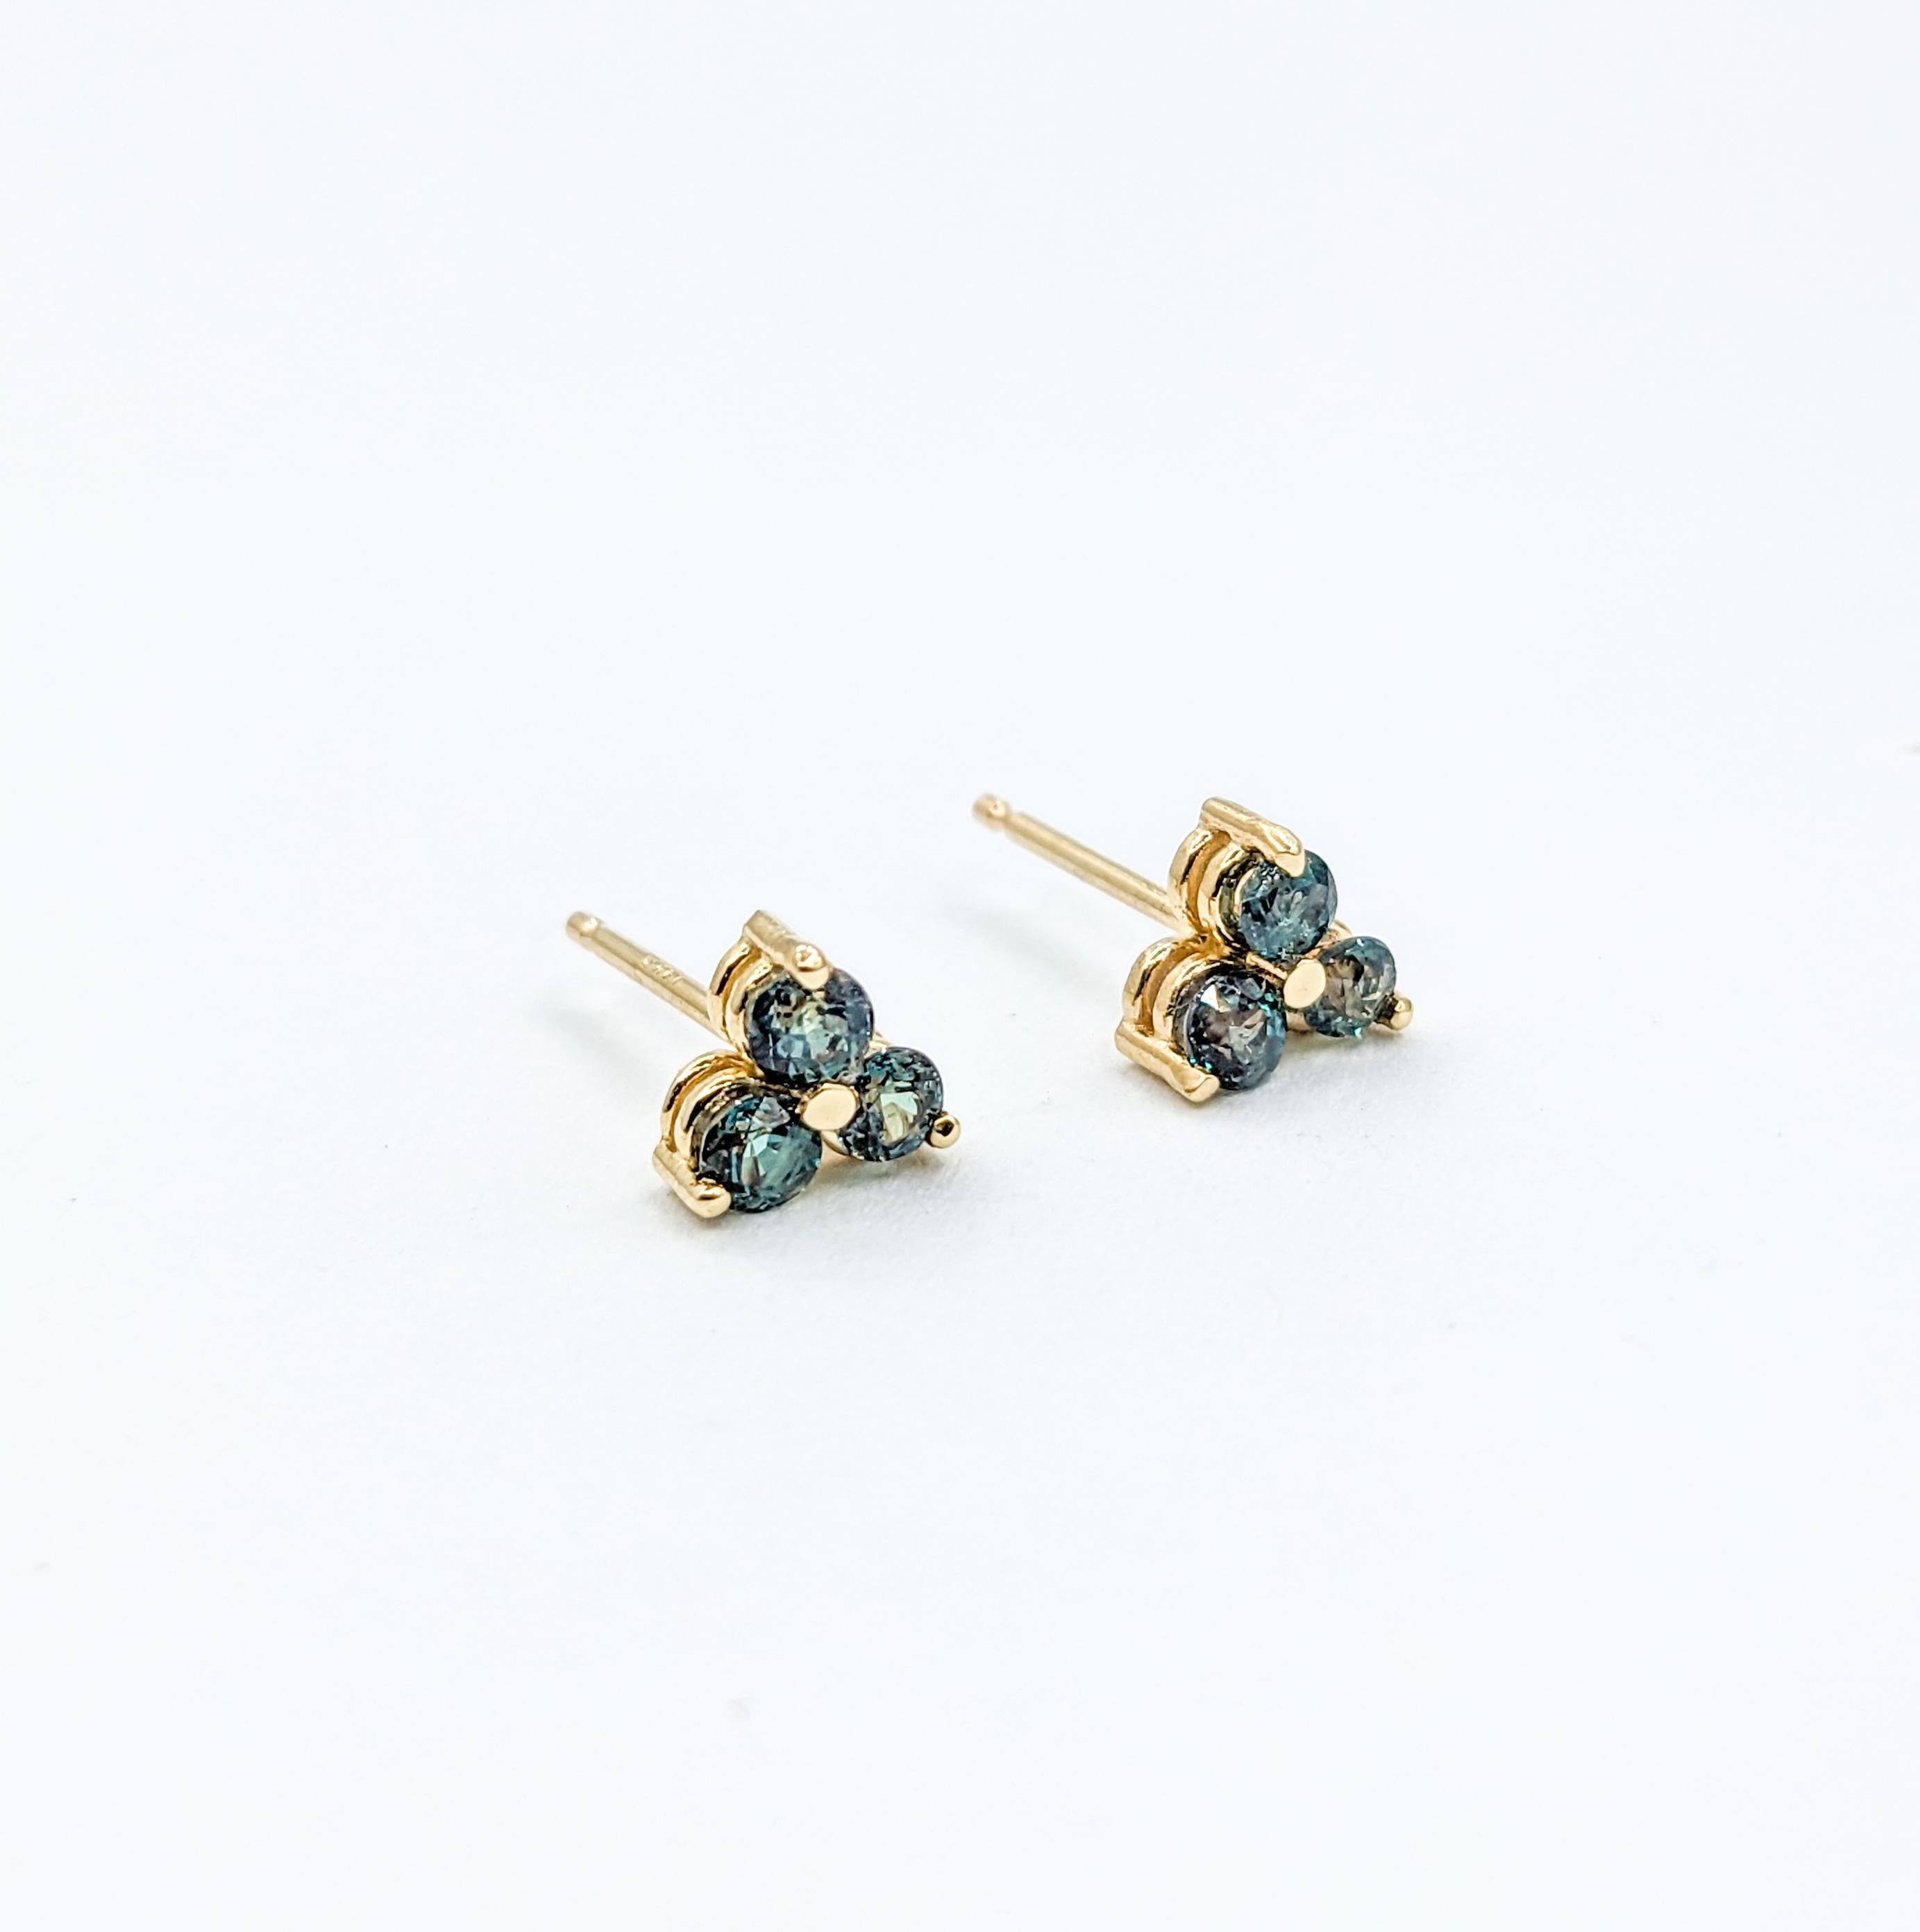 Natural Brazilian Alexandrite Color Change Stud Earrings in Gold

Introducing these beautiful natural alexandrite earrings crafted in 14K Yellow Gold. These petite stud earrings feature a captivating minimalist 3-Stone design. The earrings showcase